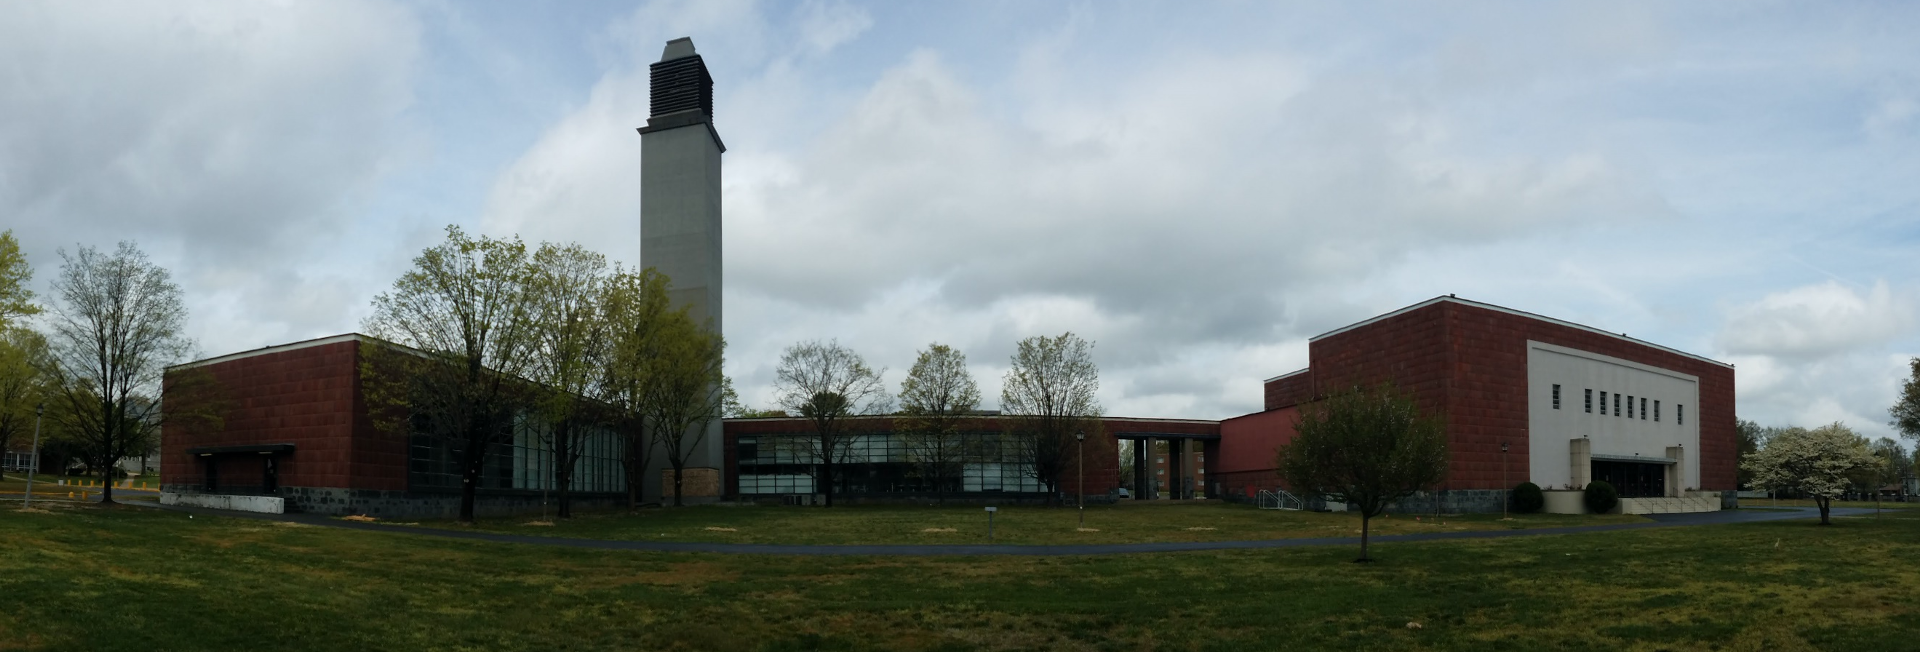 A Towering Memorial: The Robert L. Vann Tower and the Belgian Friendship Building